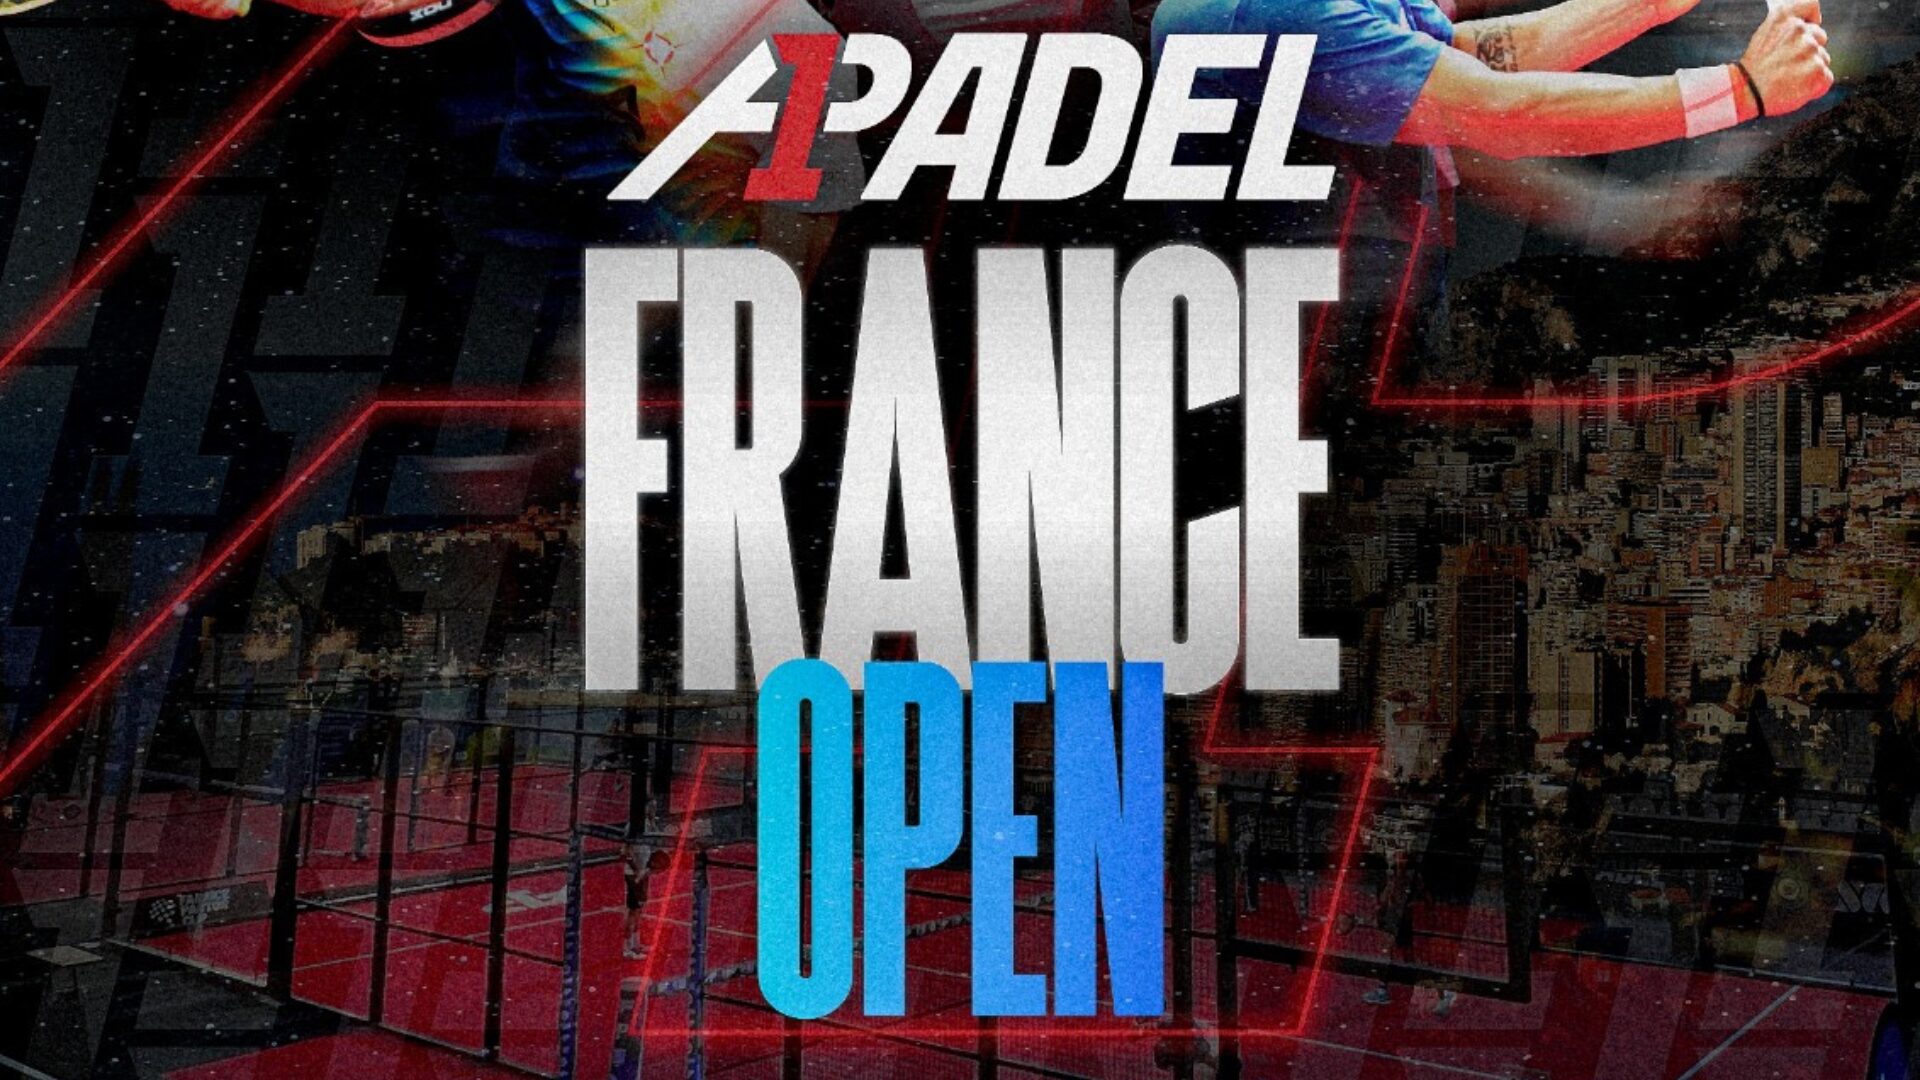 A1 Padel French Open